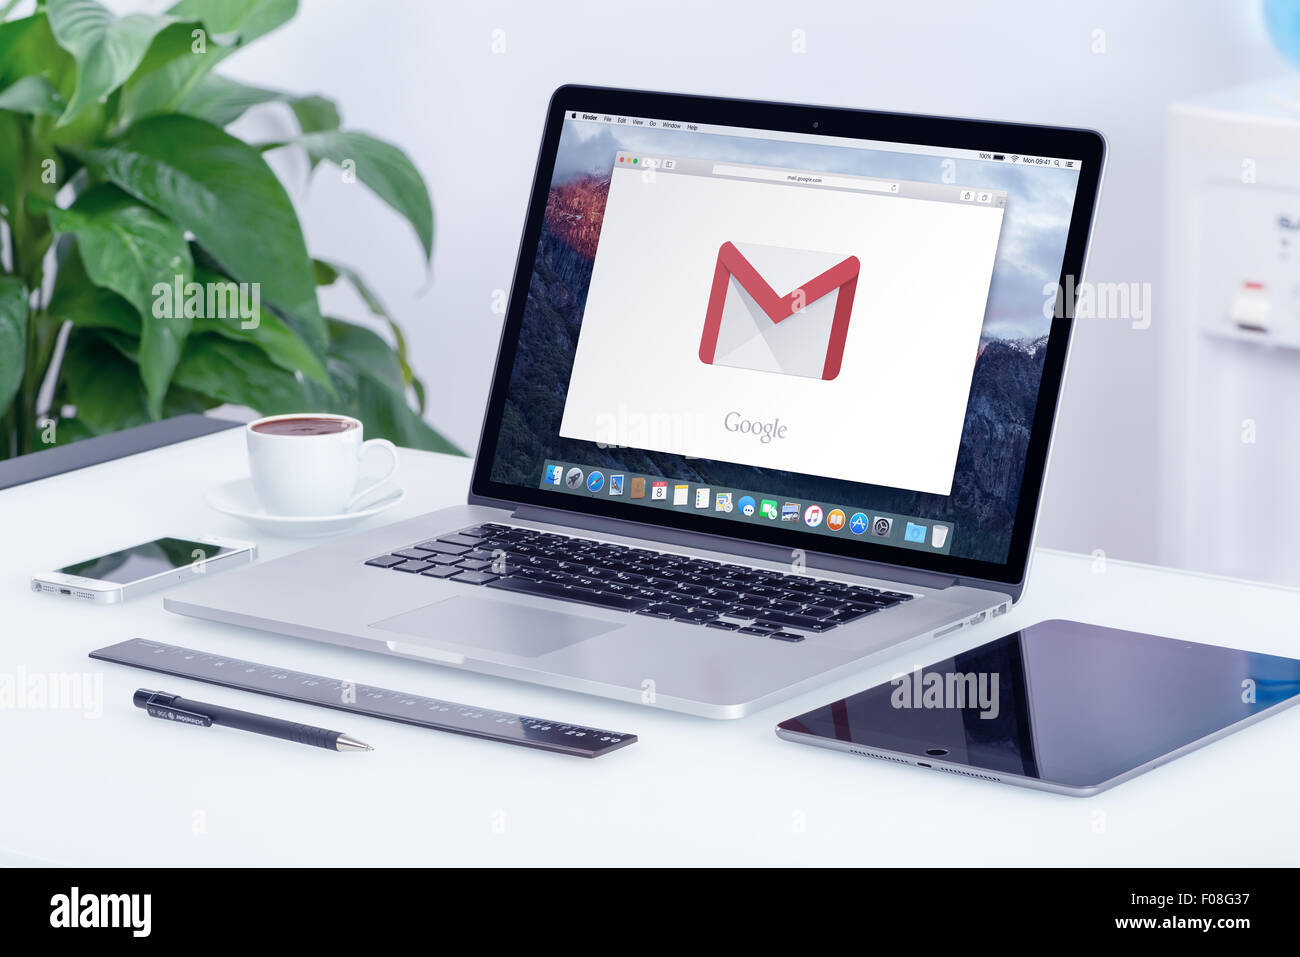 Varna, Bulgaria - May 29, 2015: Google Gmail logo on the Apple MacBook Pro display that is on office desk in office work place Stock Photo